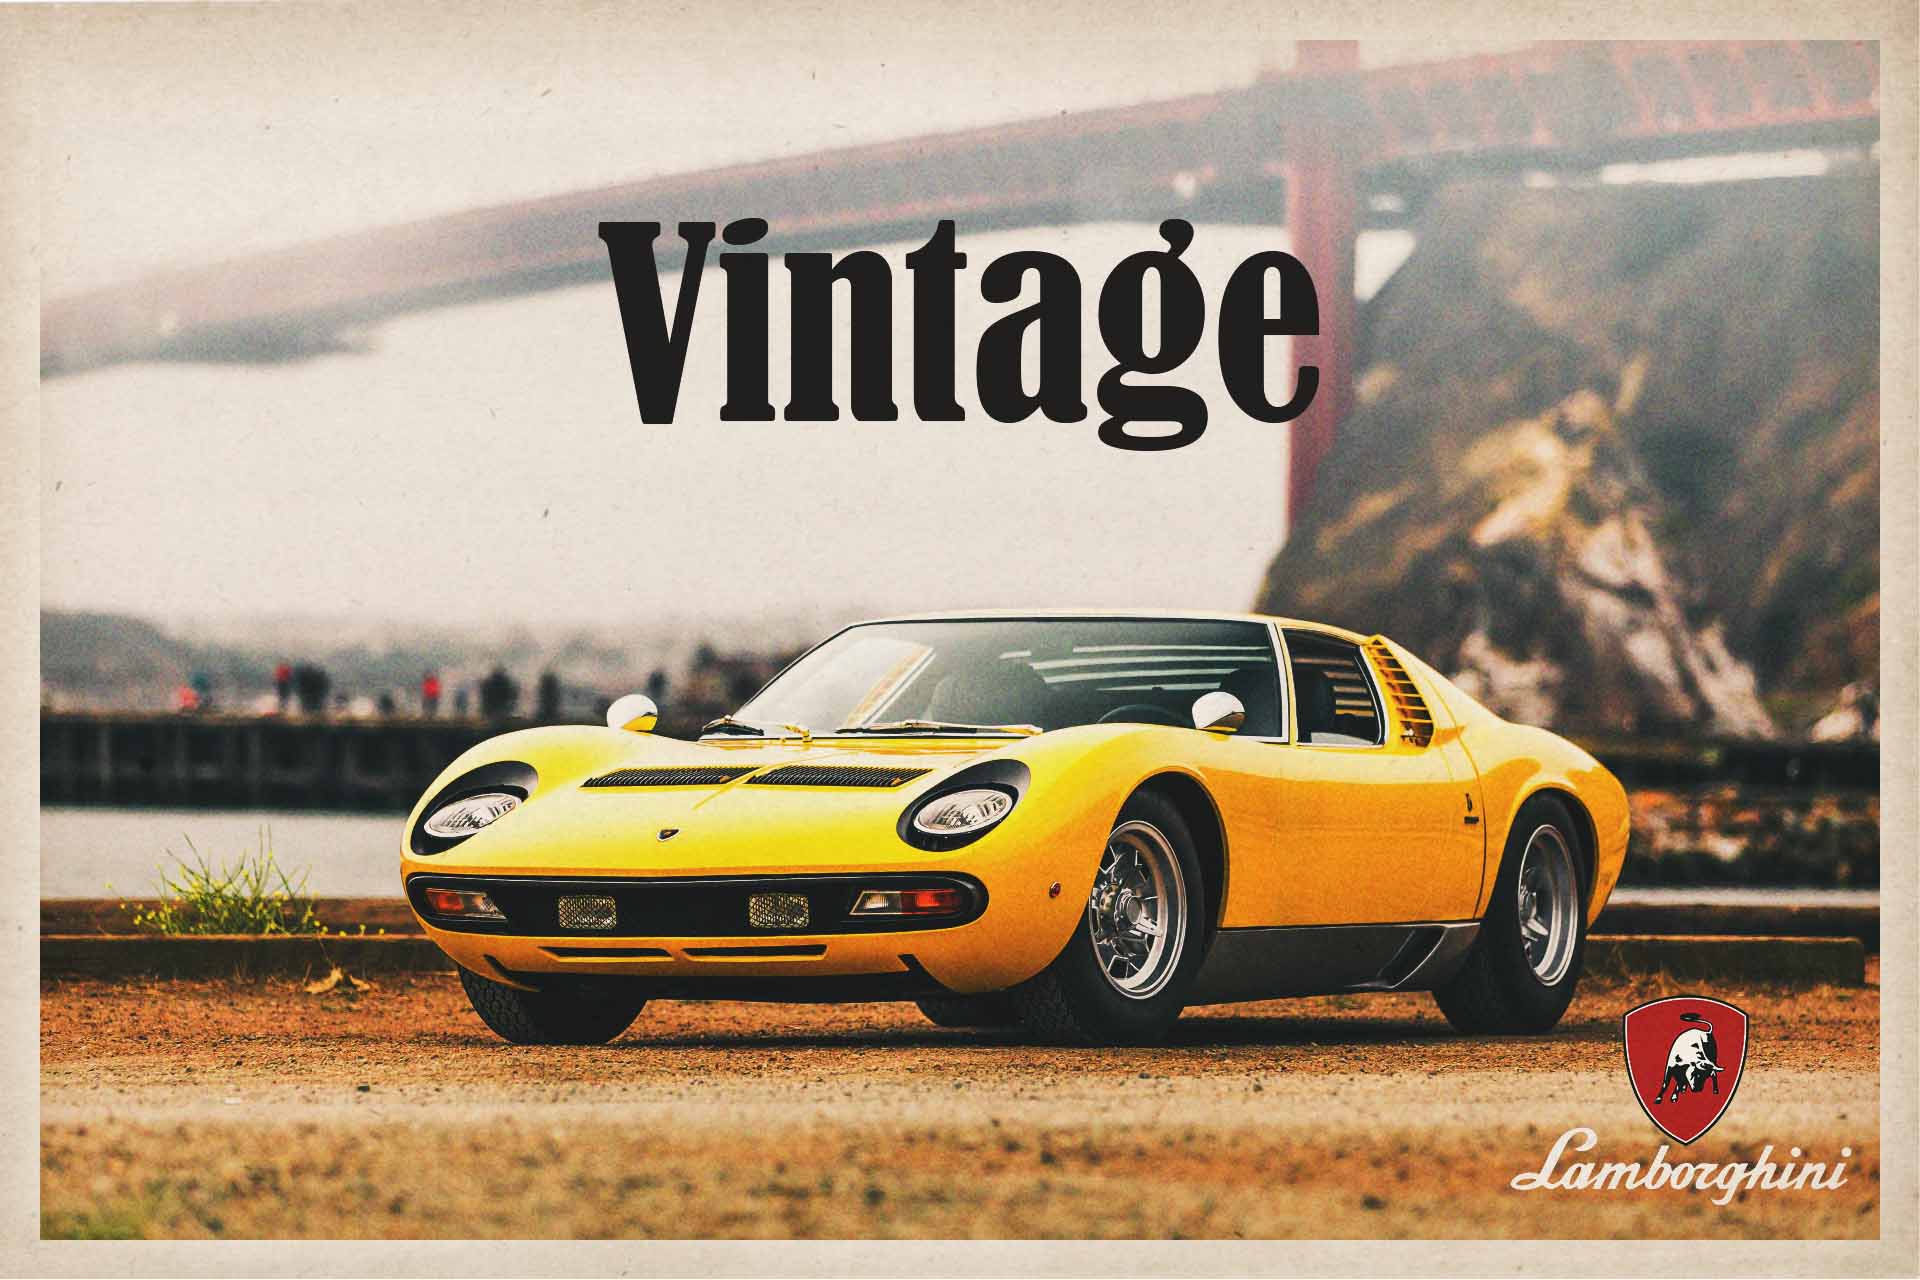 Mockup of a vintage Lamborghini ad with a yellow Miura parked under and in front of the Golden Gate Bridge